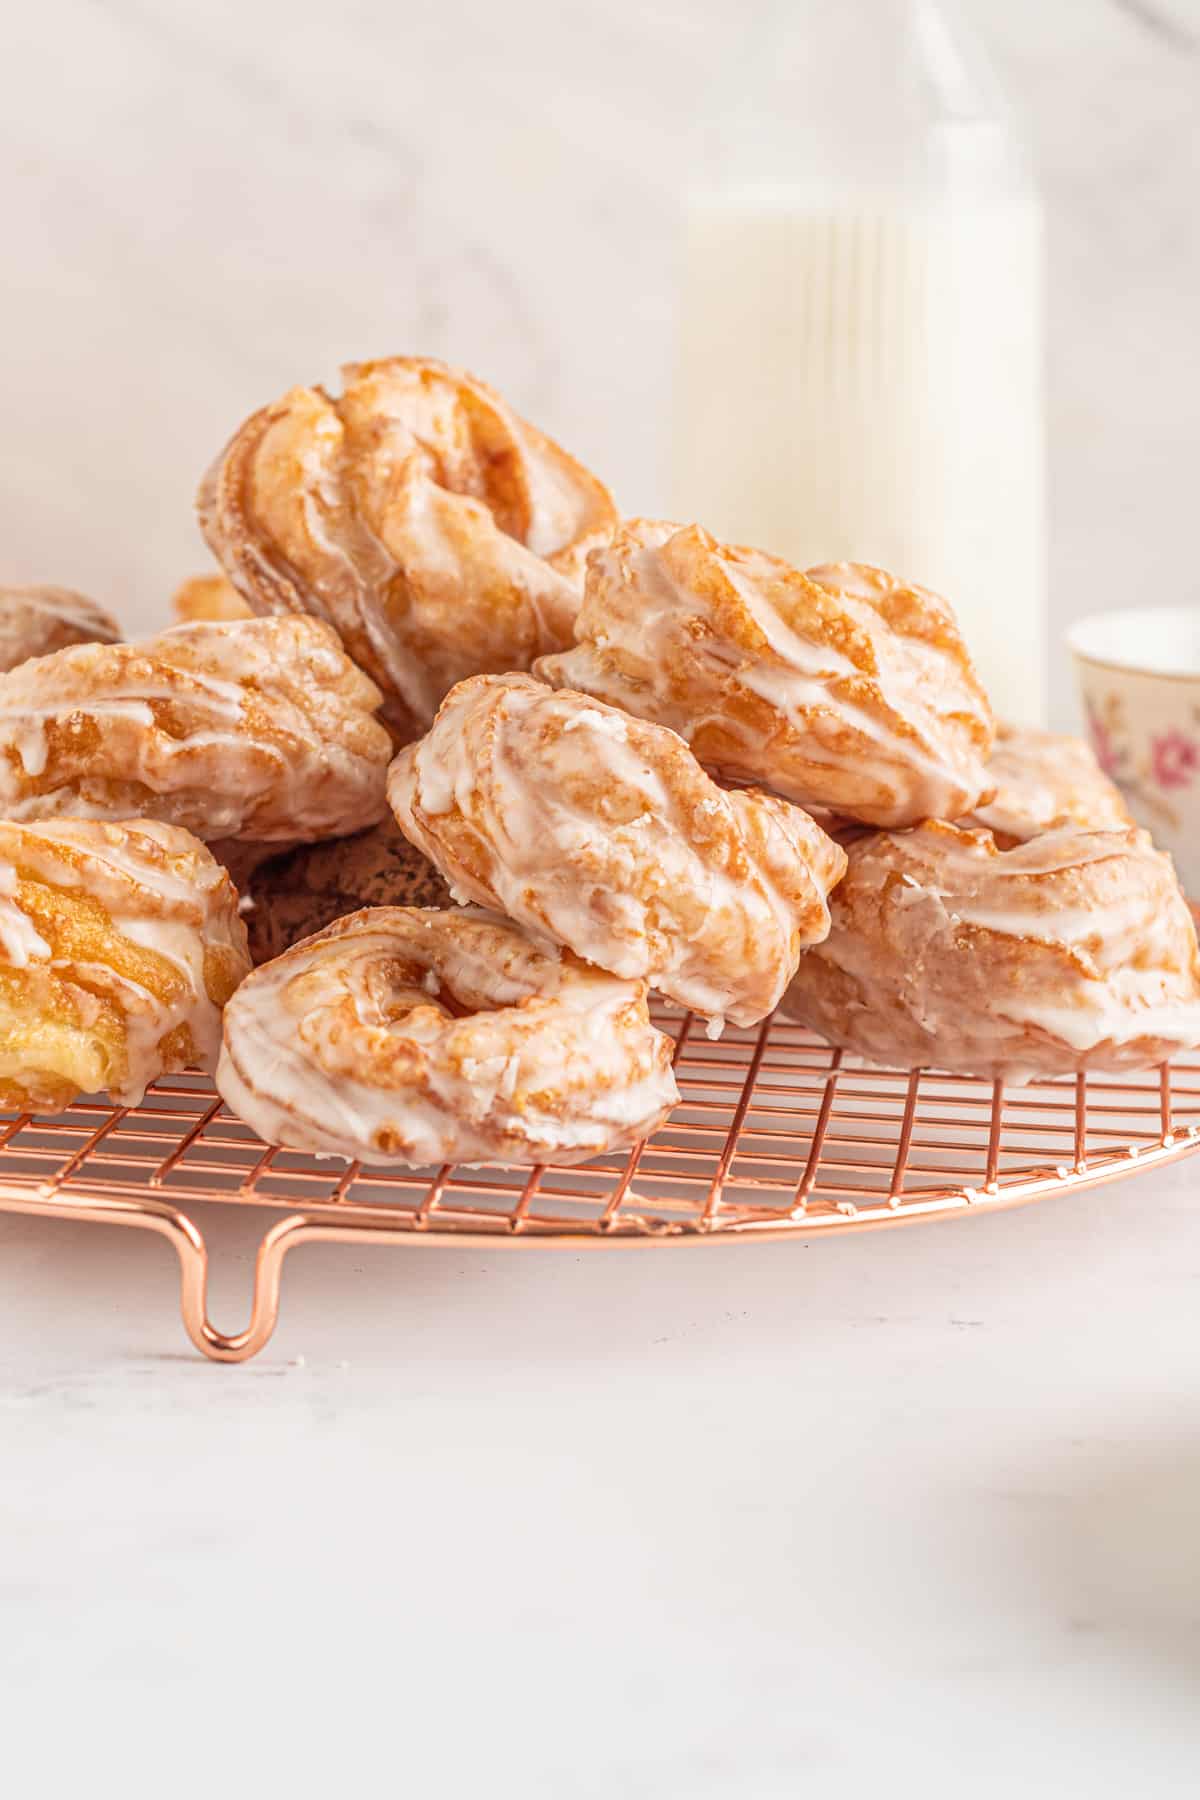 French crullers dunking donuts copy cat